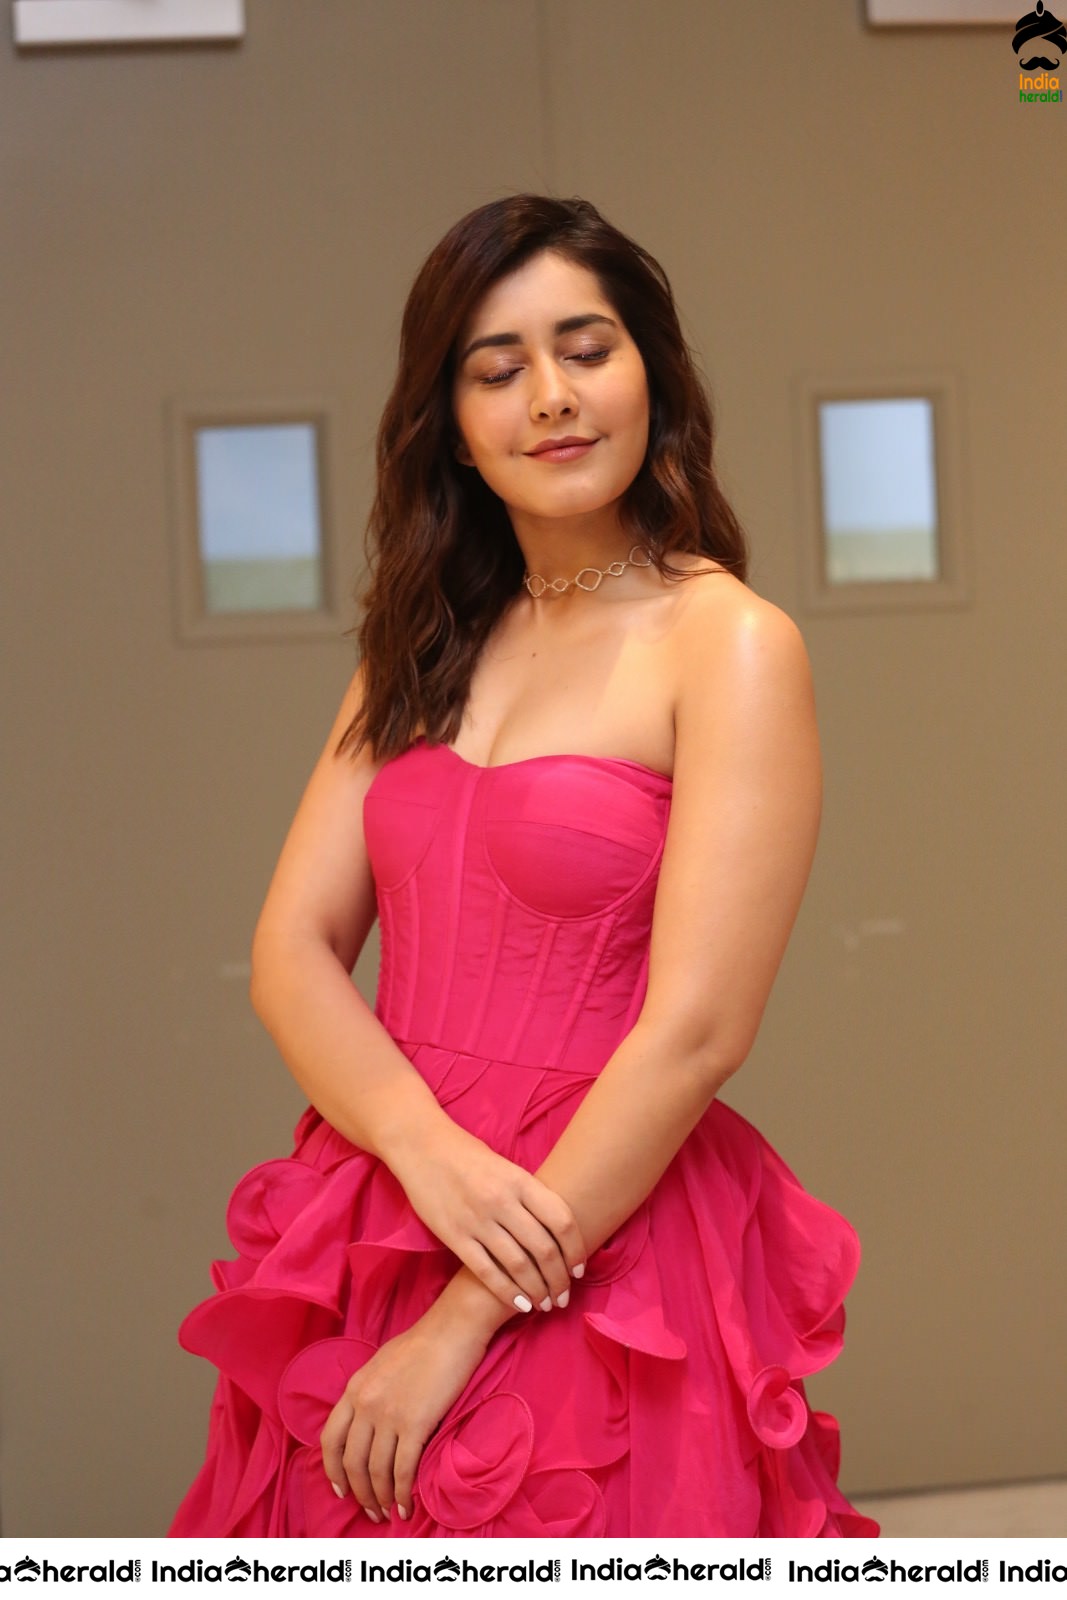 Raashi Khanna Looking like a Barbie Doll in these Latest Compilation Photos